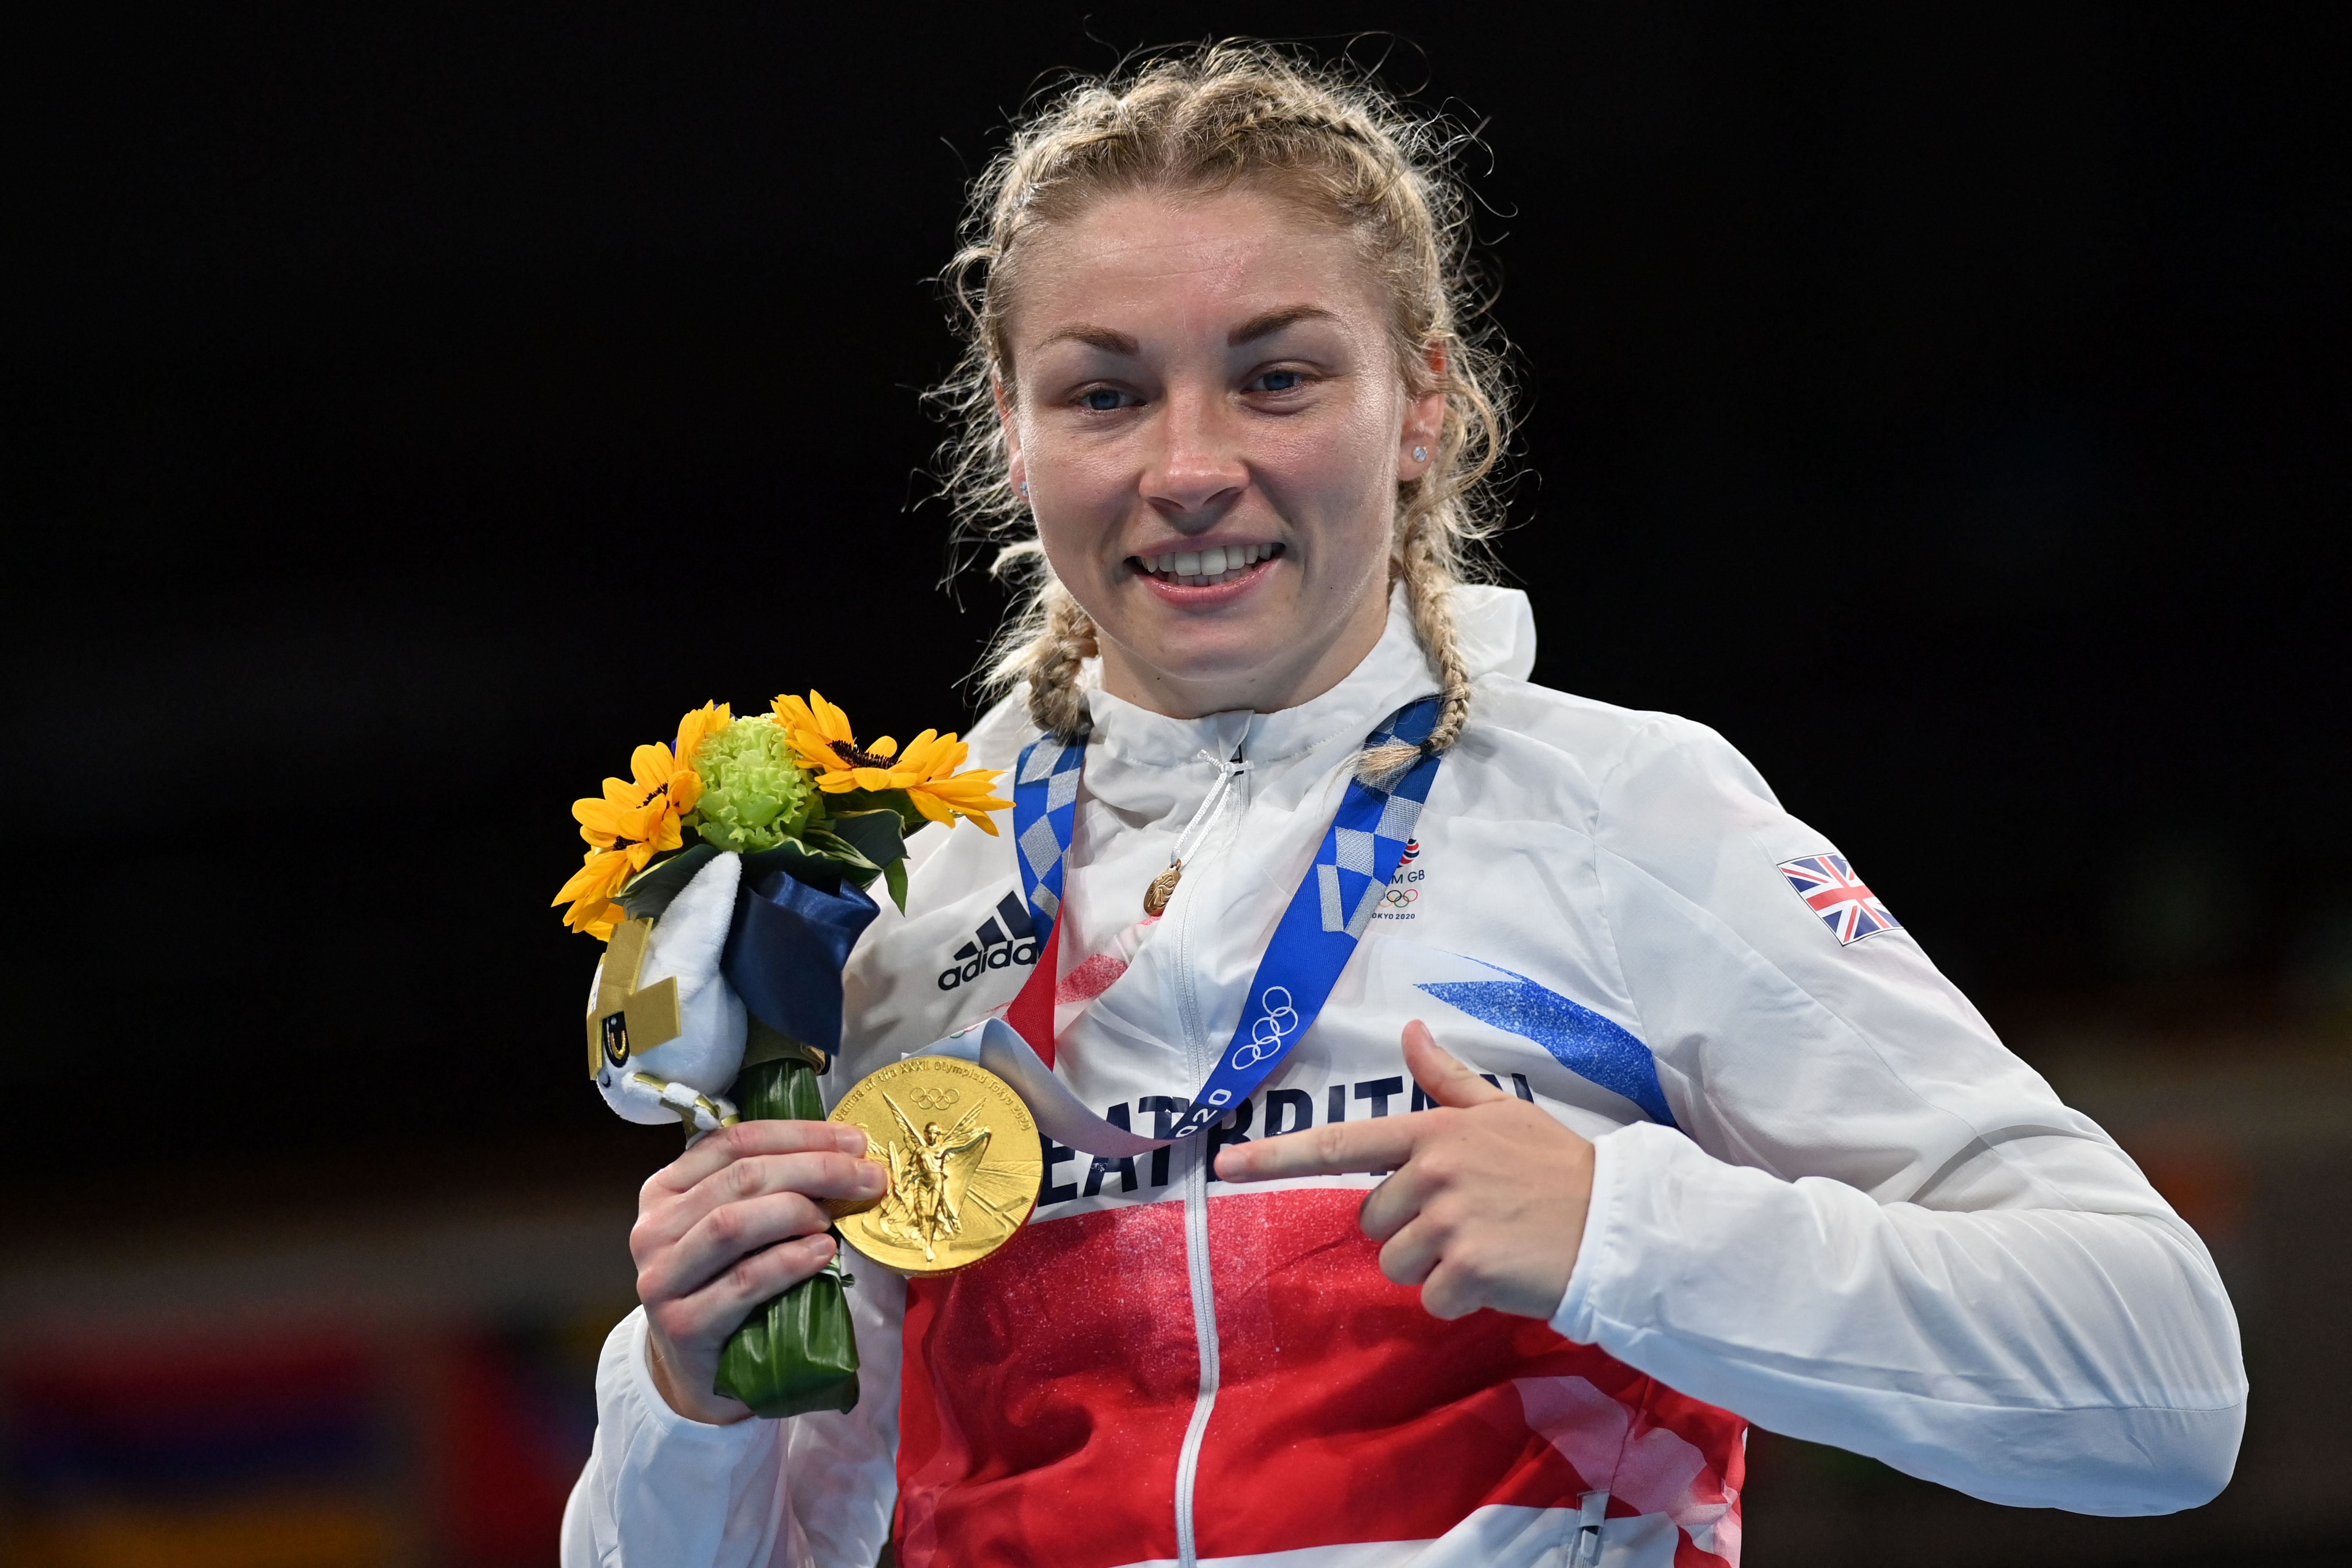 Lauren Price won Great Britain’s final gold medal of the Tokyo Olympics